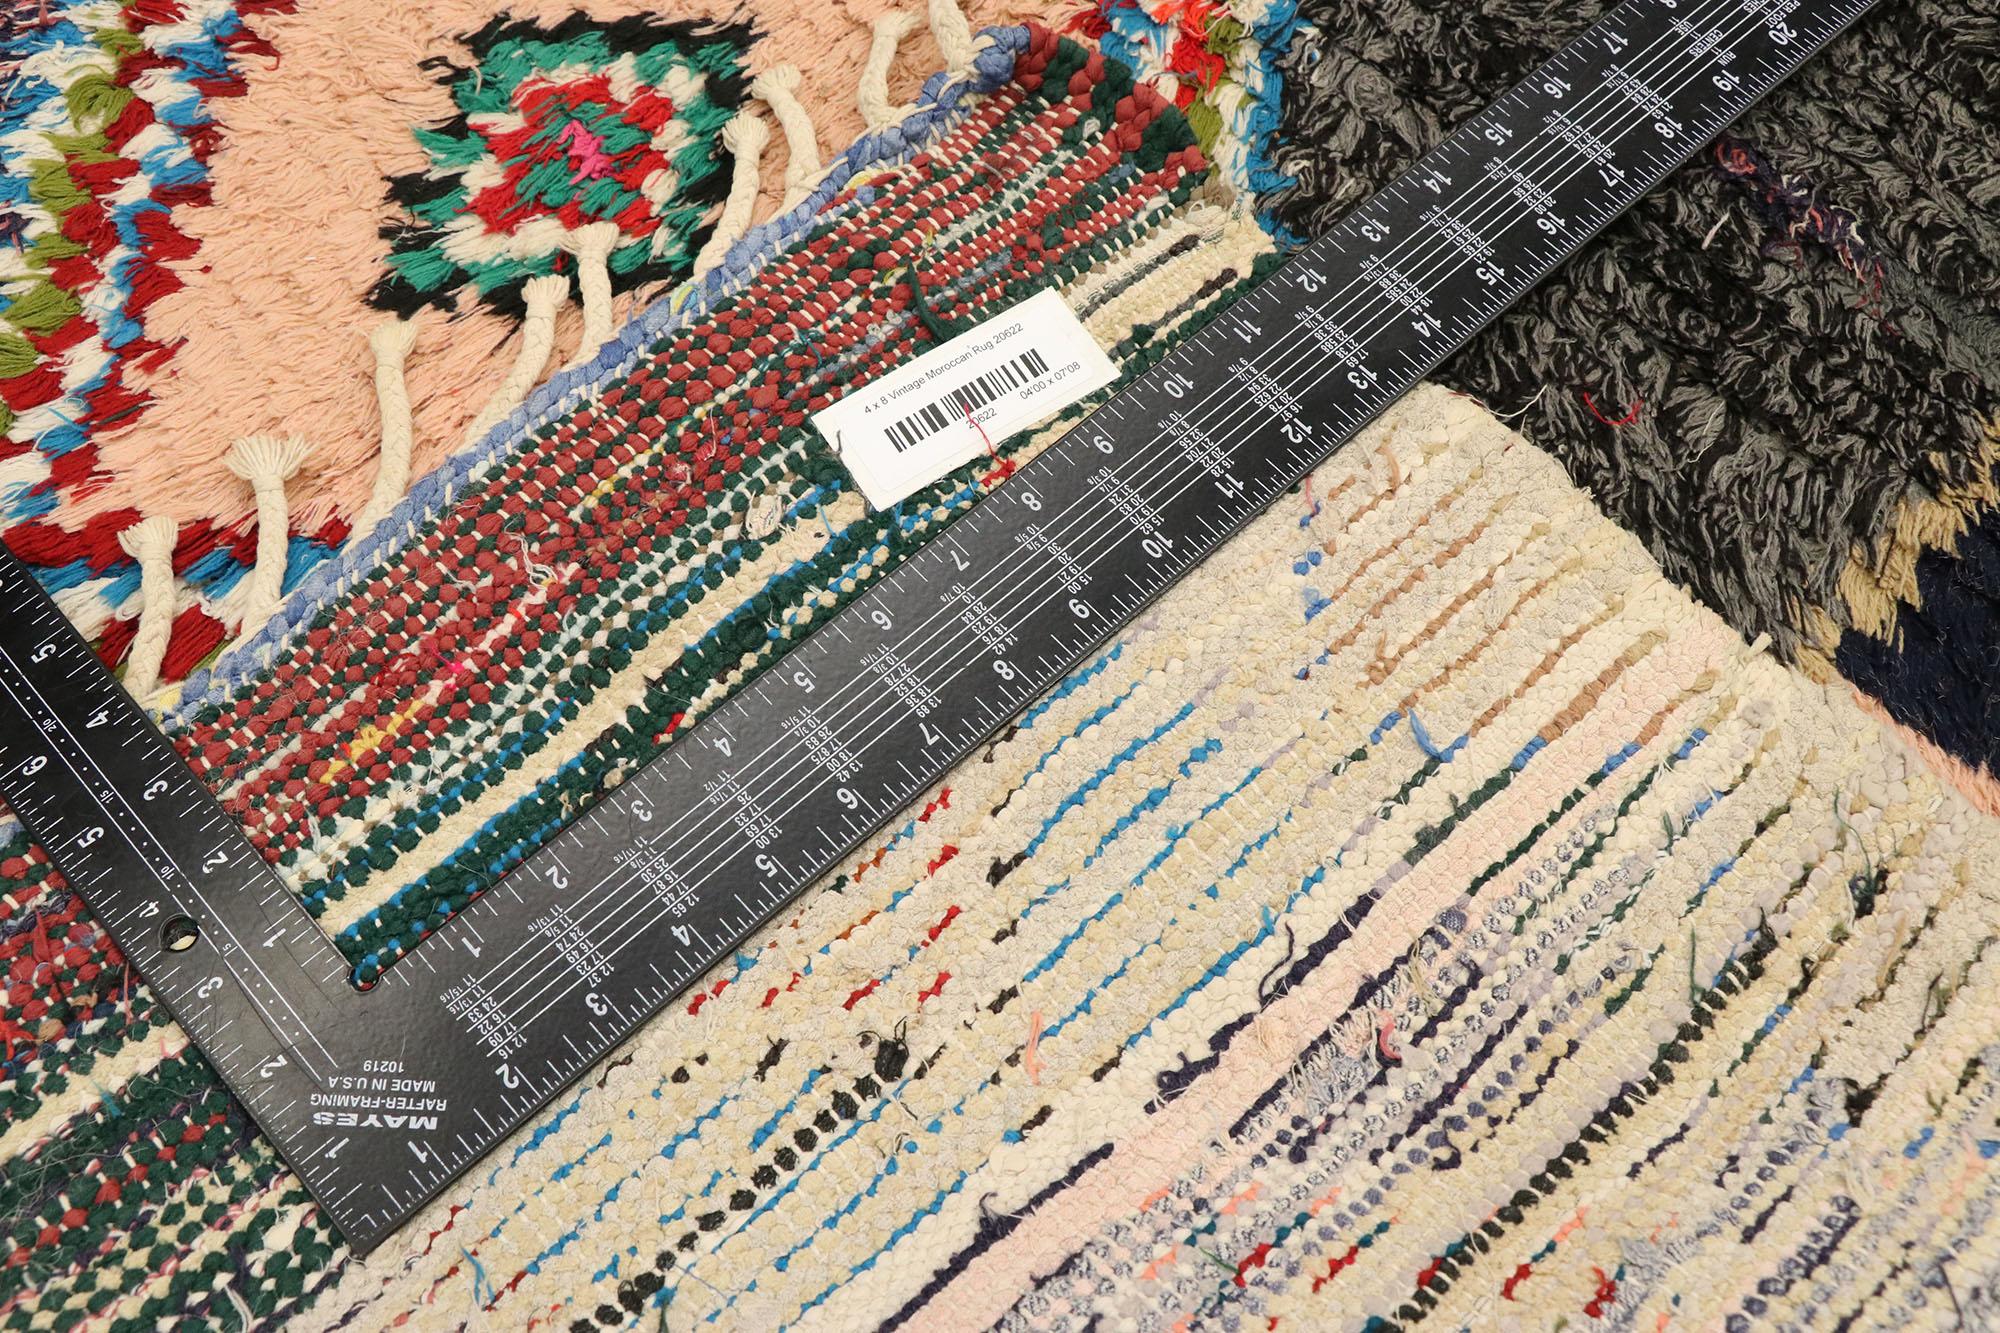 Vintage Berber Moroccan Azilal Rug, Boho Chic Meets Tribal Enchantment In Good Condition For Sale In Dallas, TX